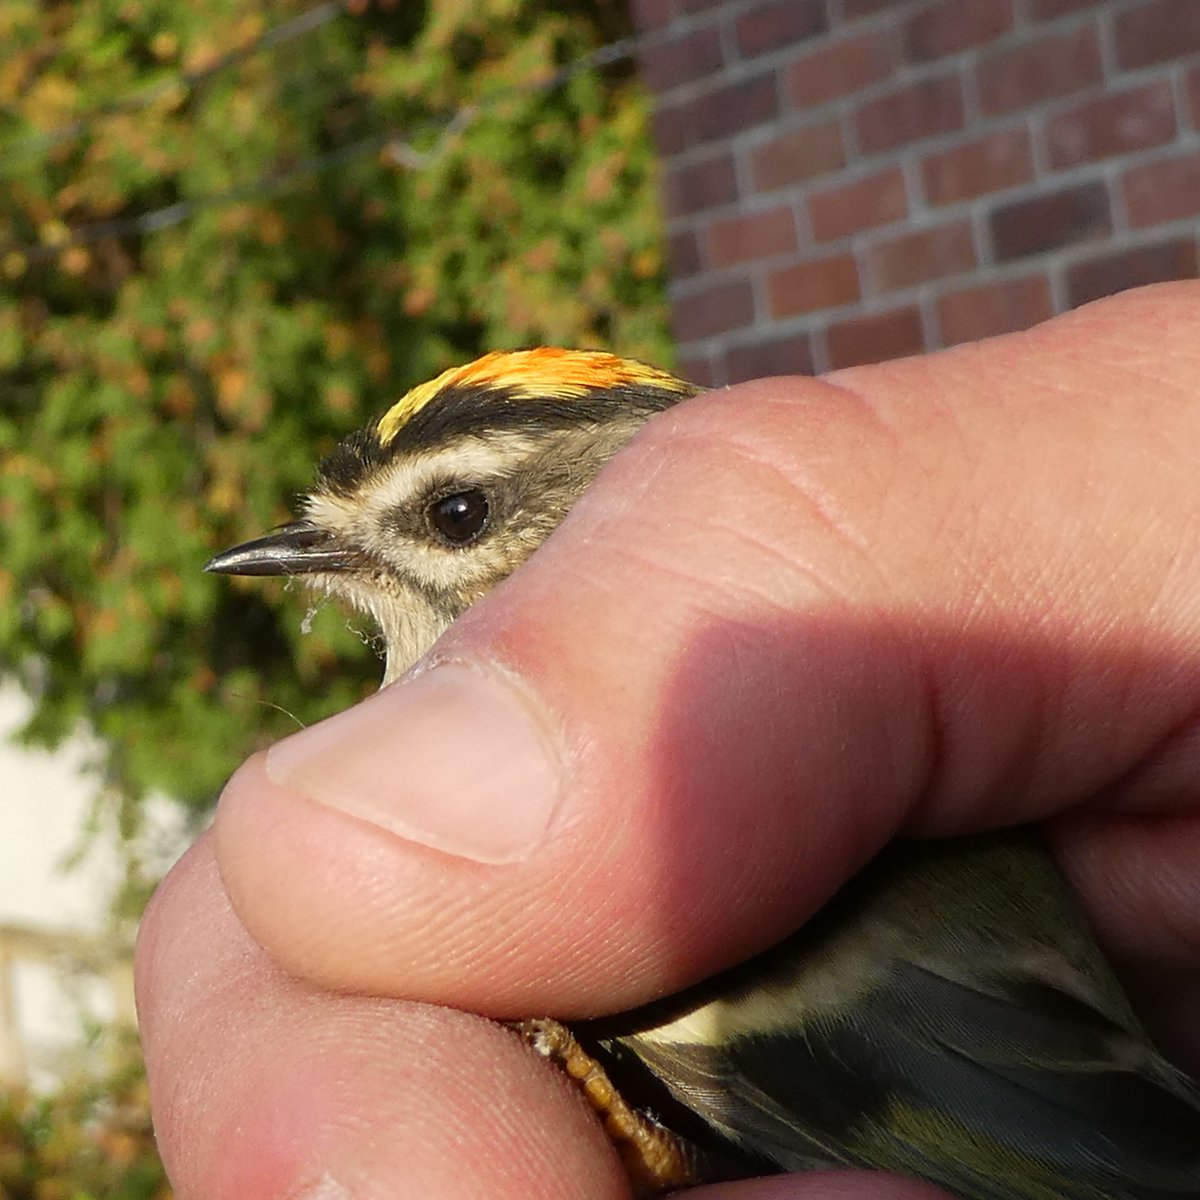 This morning we found that a 🐦 Golden-crowned Kinglet had made their way into our building. Luckily, we were able to safely catch them and released them outdoors. Safe travels on your migration south, our winged friend!

#birds #YRDSB @YRDSB @YRDSBGetOut